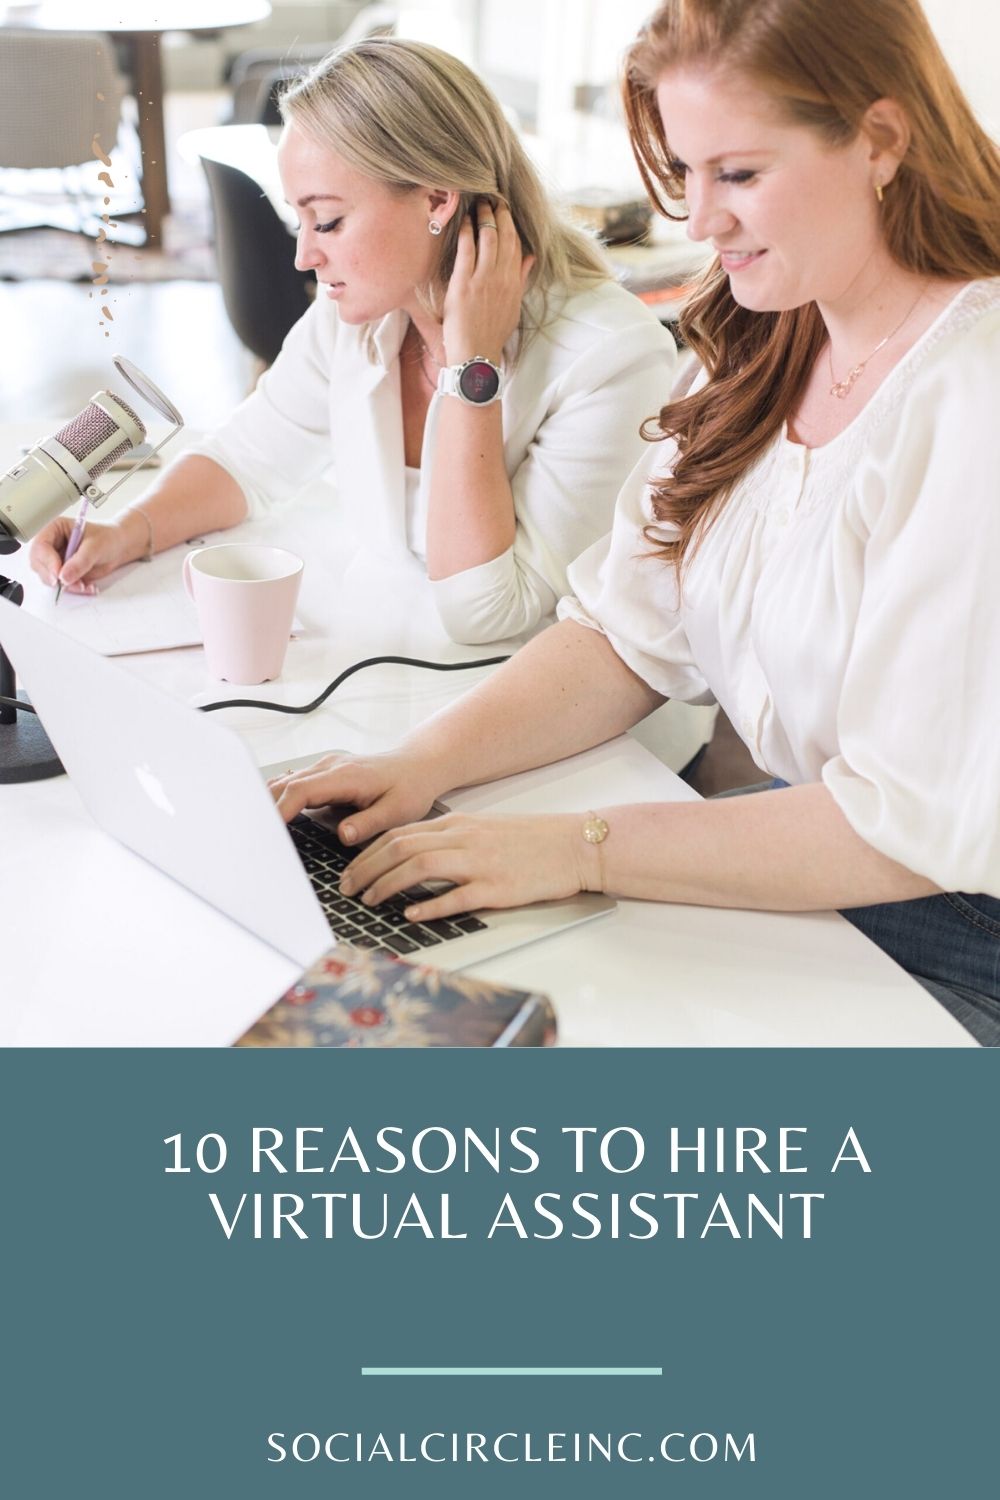 10 Reasons to Hire a Virtual Assistant